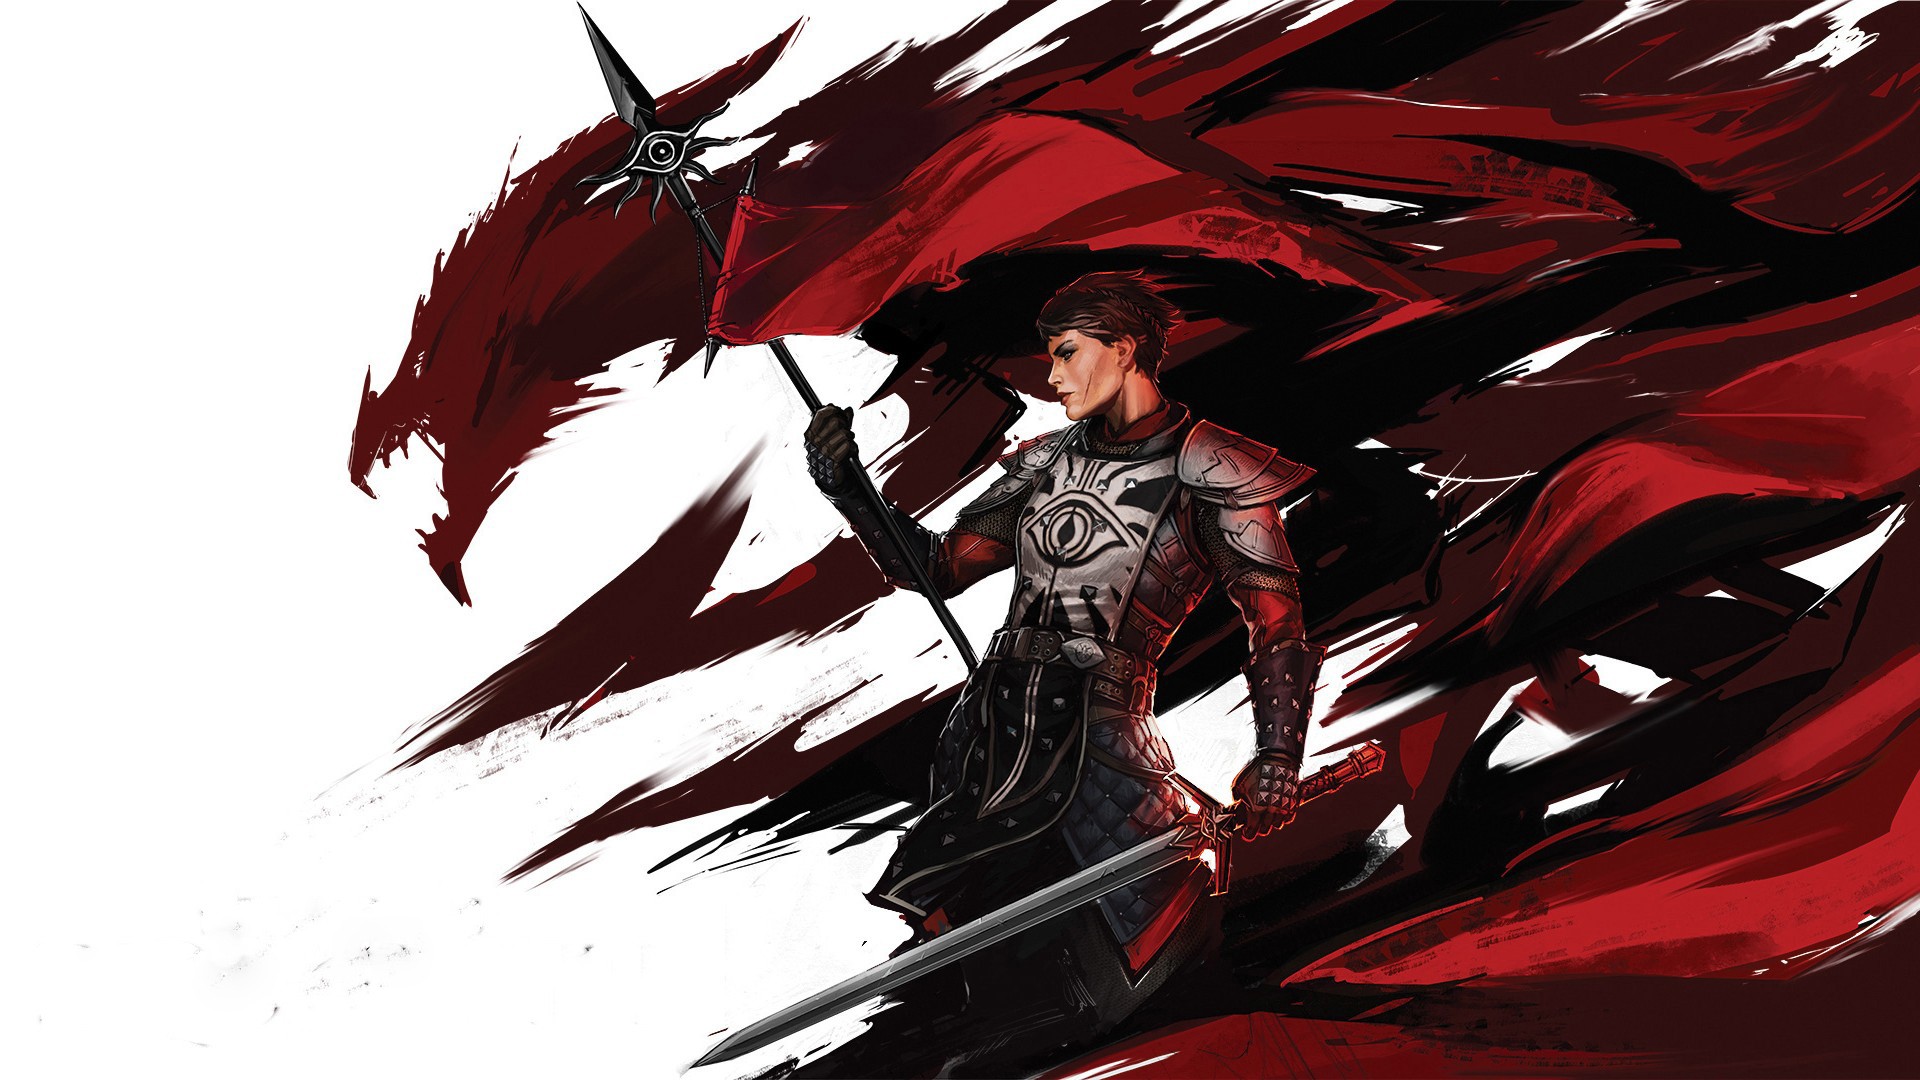 General 1920x1080 video games Cassandra Pentaghast Dragon Age: Inquisition video game girls RPG PC gaming armor women with swords fantasy art fantasy girl video game art